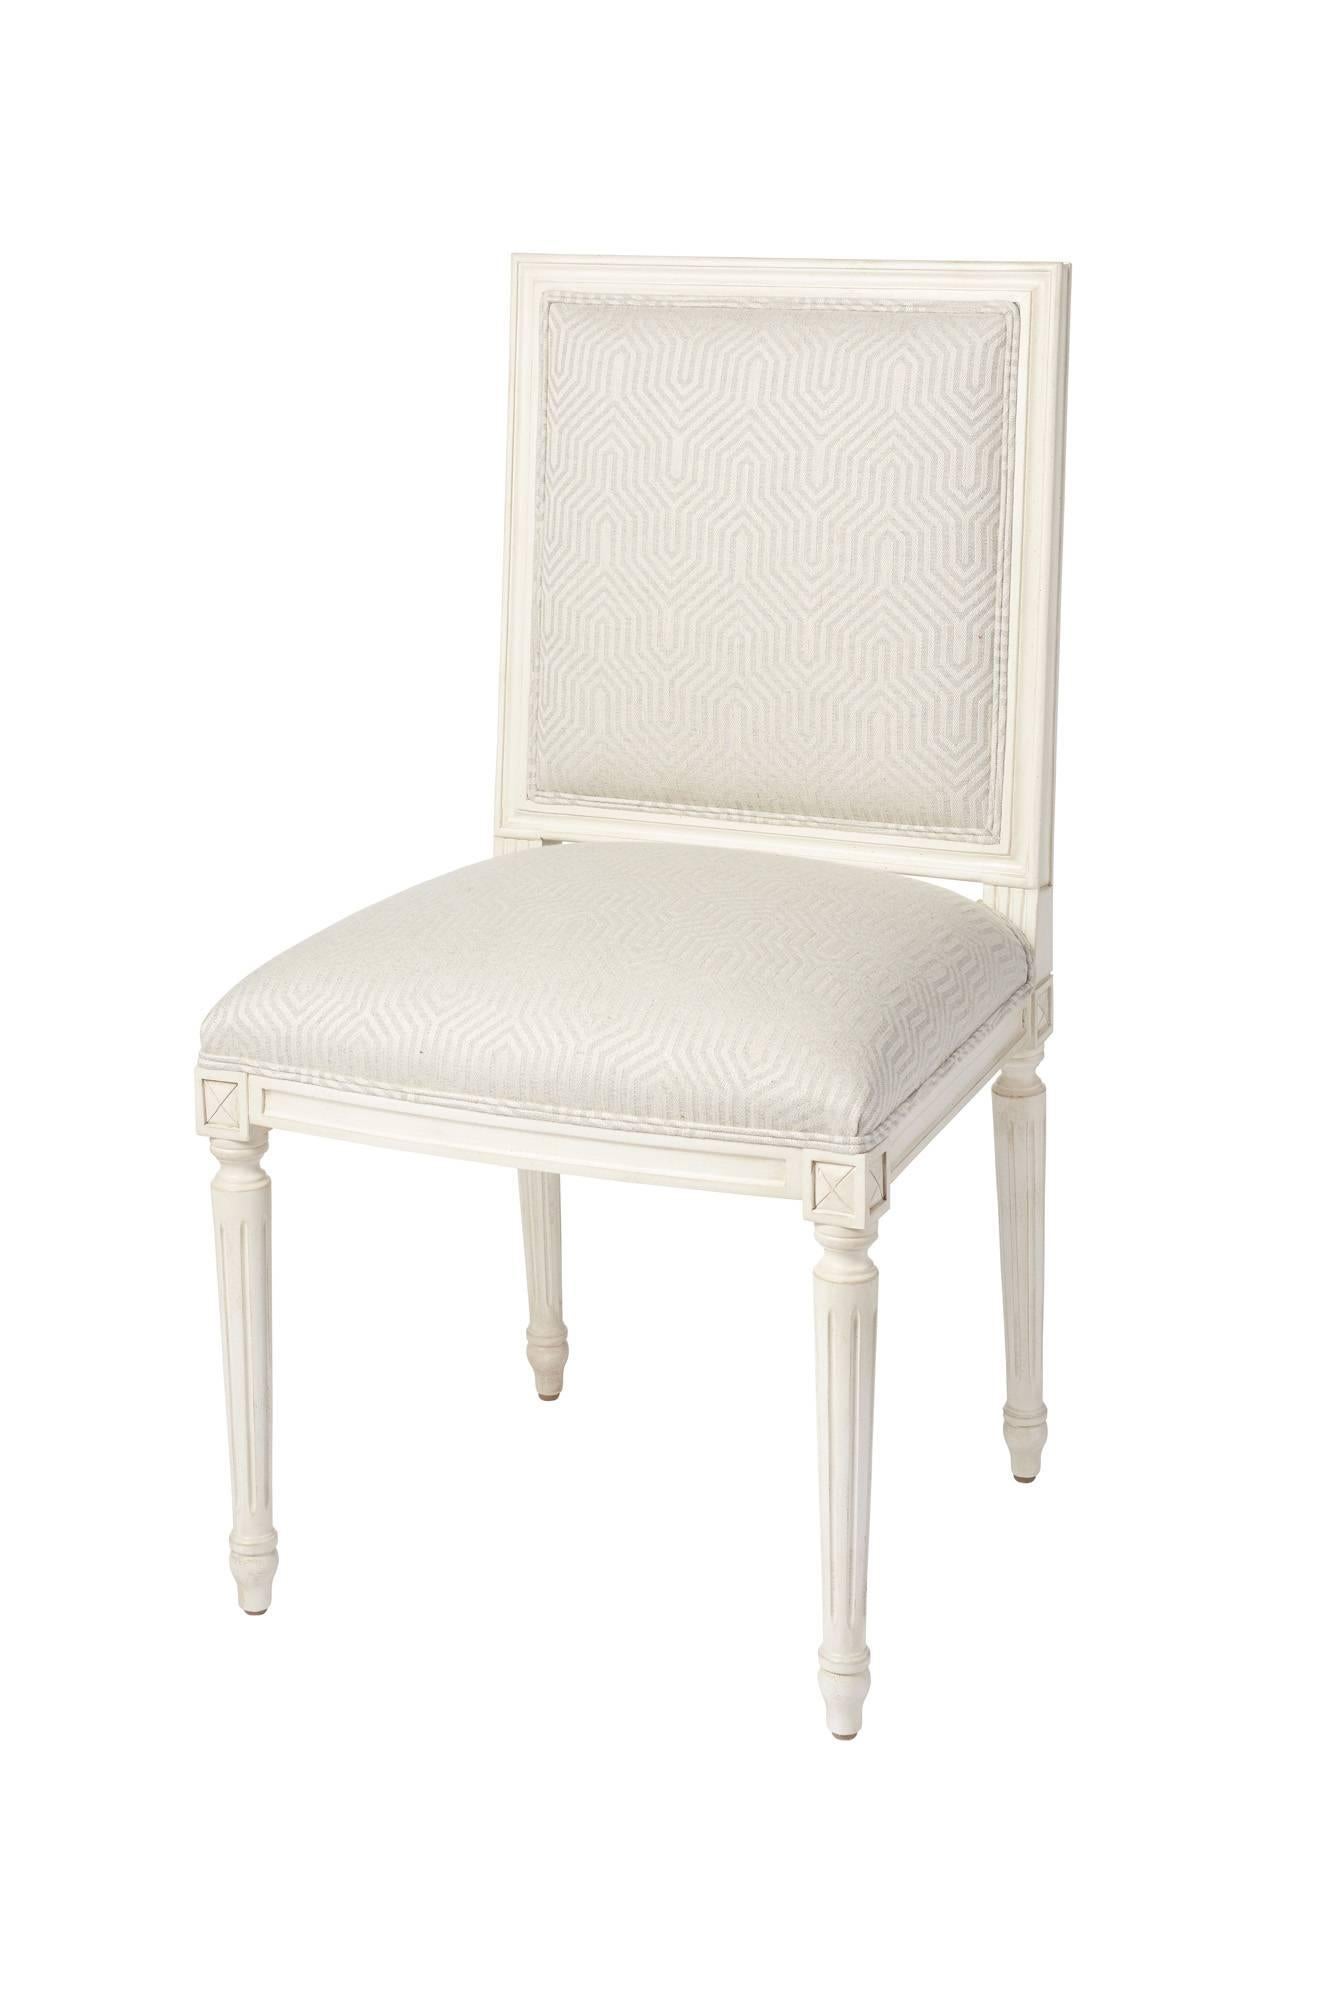 Schumacher Marie Therese Eureka Woven Ziggurat Hand-Carved Beechwood Side Chair For Sale 3